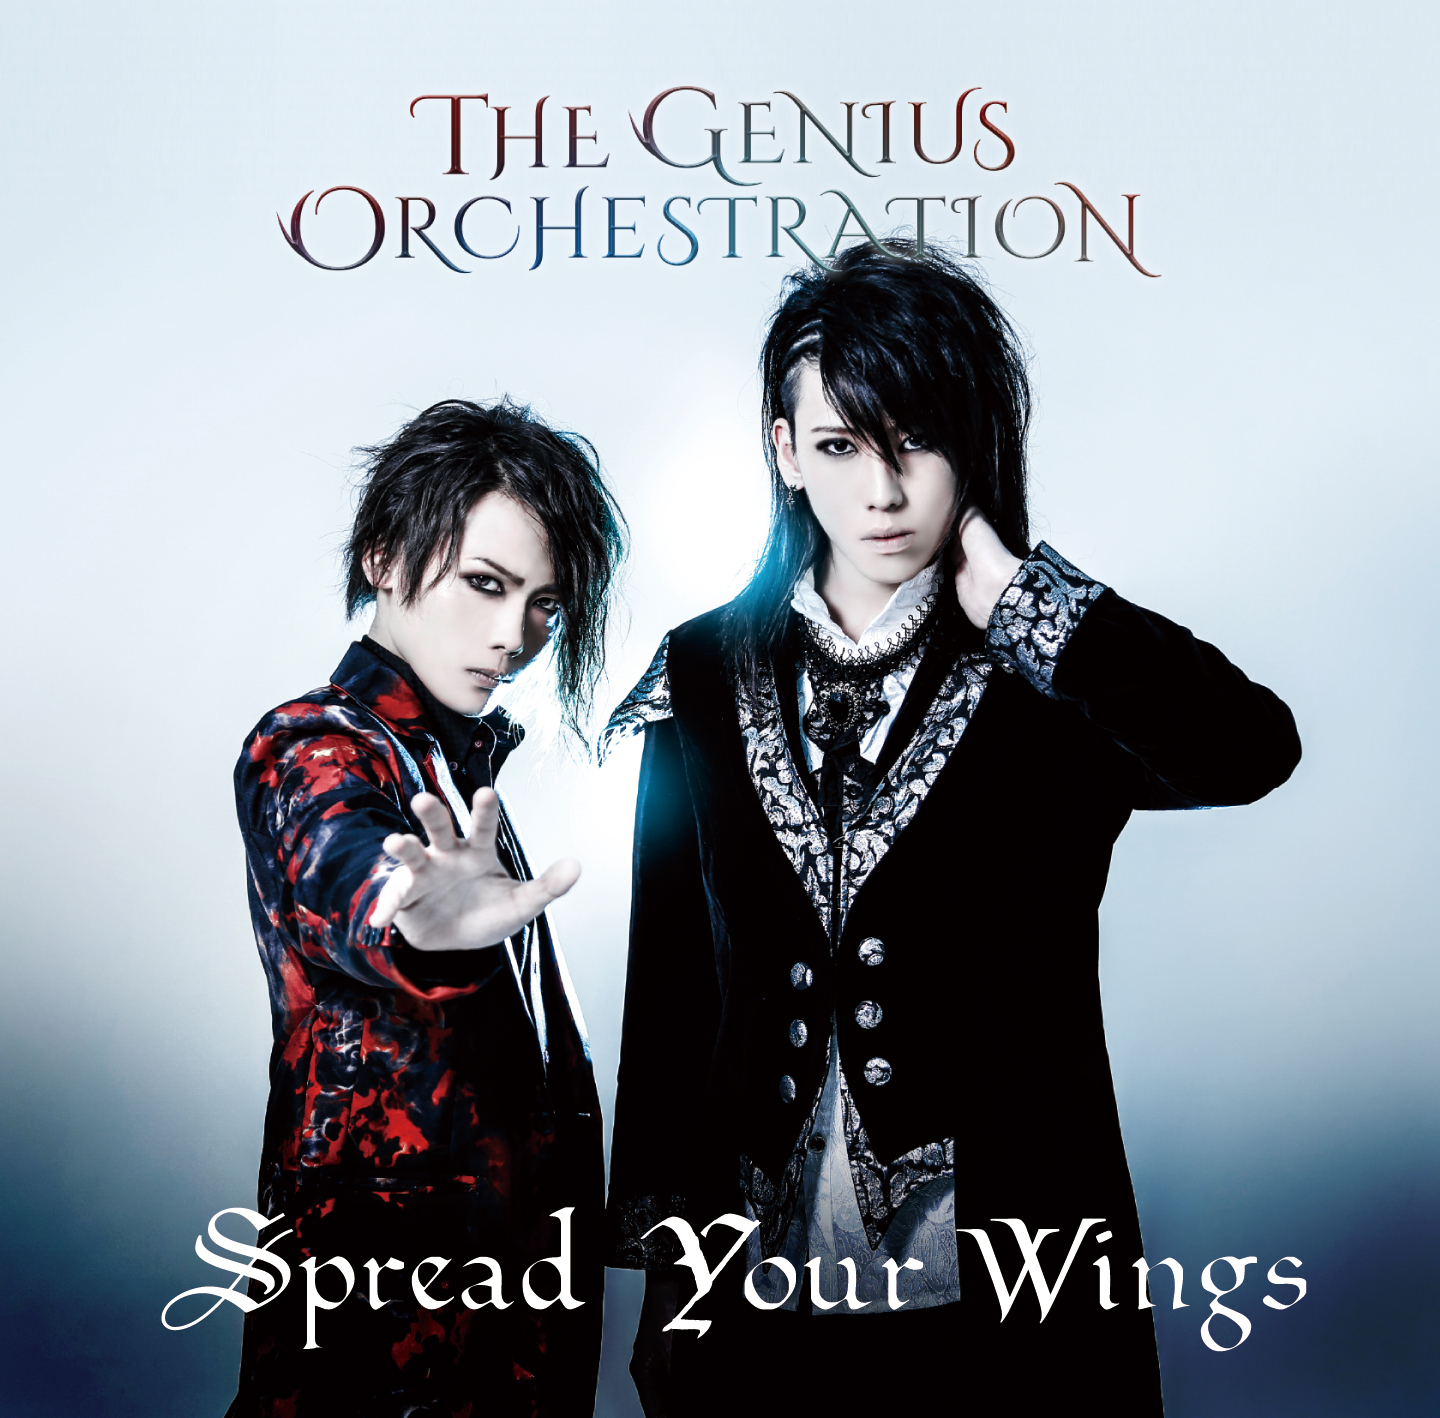 New Album “Spread your wings” 2019/11/6 in stores!!